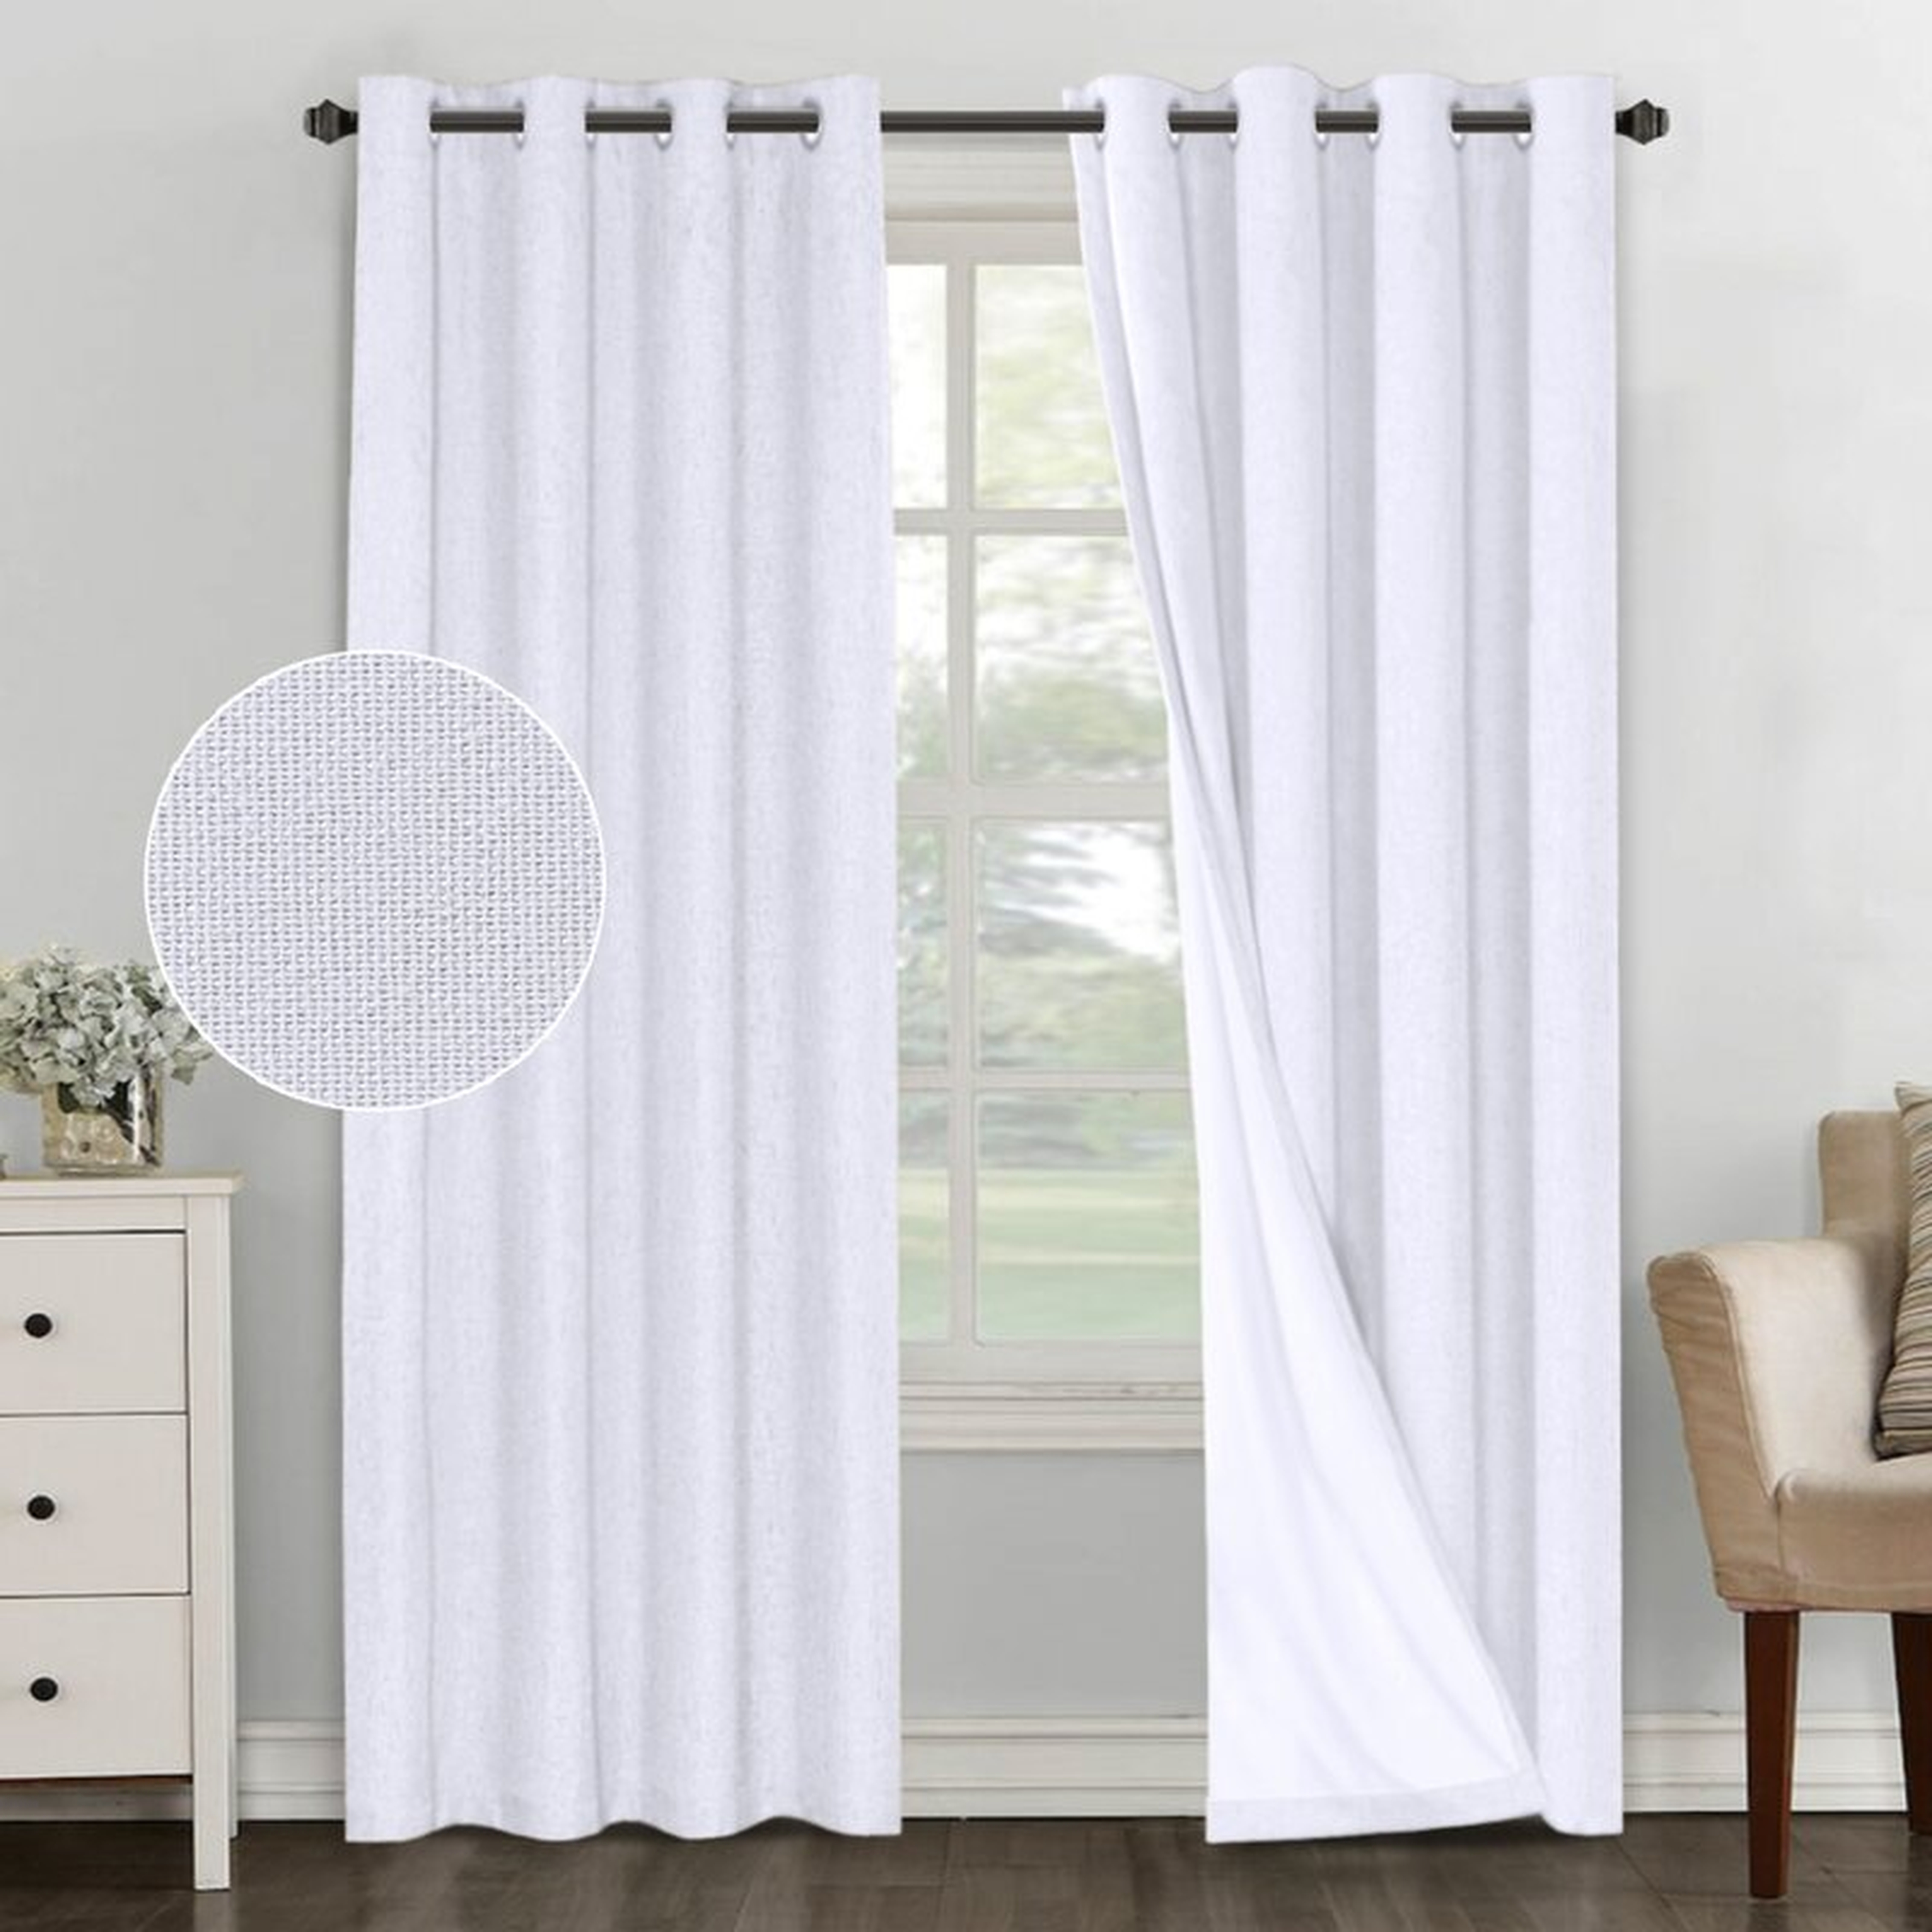 Mike Solid Color Max Blackout Thermal Grommet 2 Curtain/Drapes (Set of 2) - Wayfair